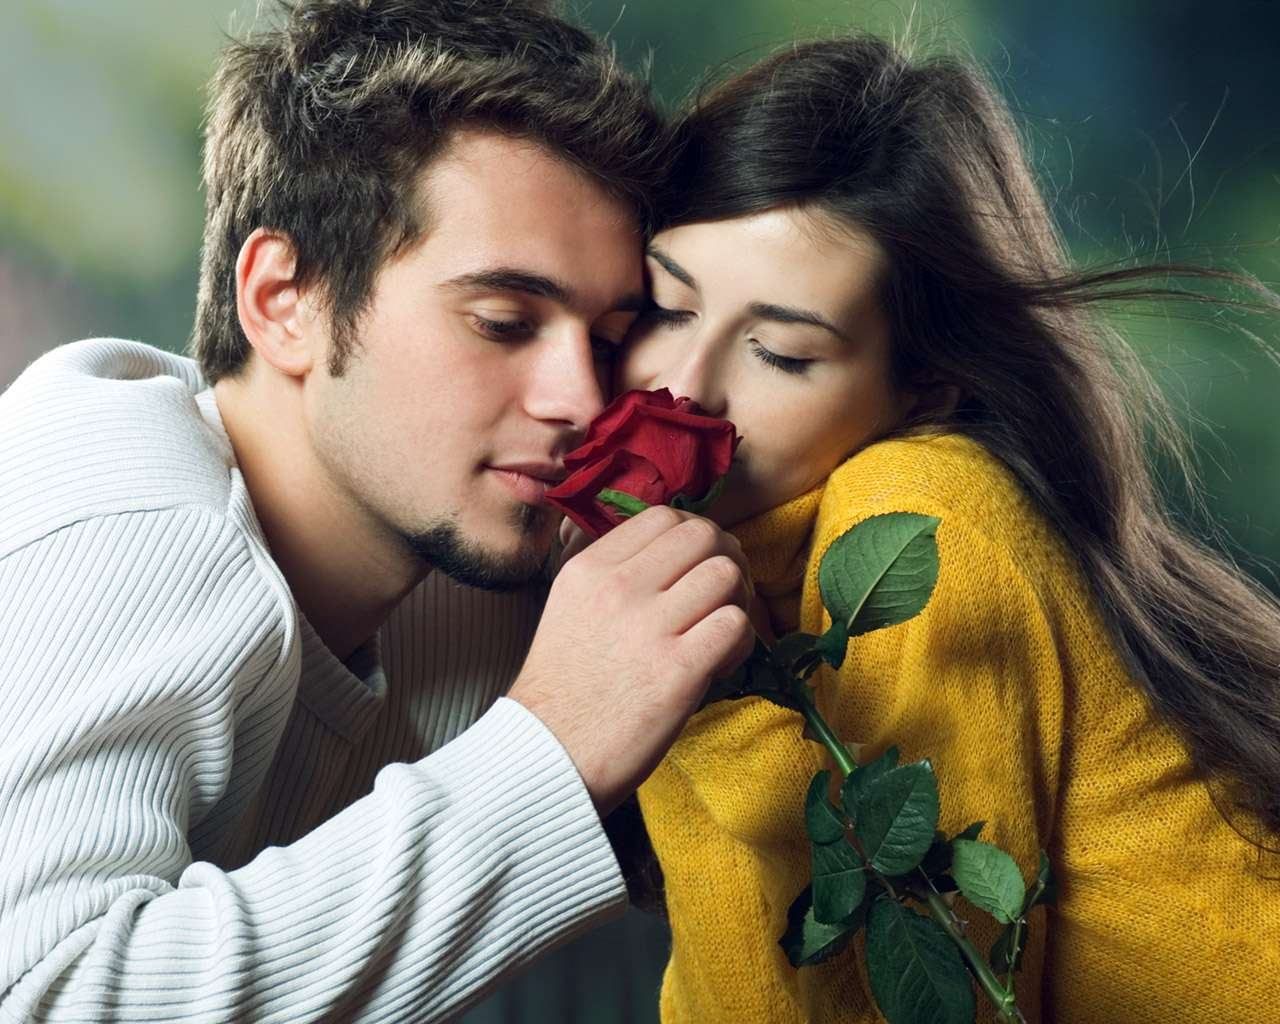 Colletion Of Romantic Love Couple Images Free Download | Romantic ...